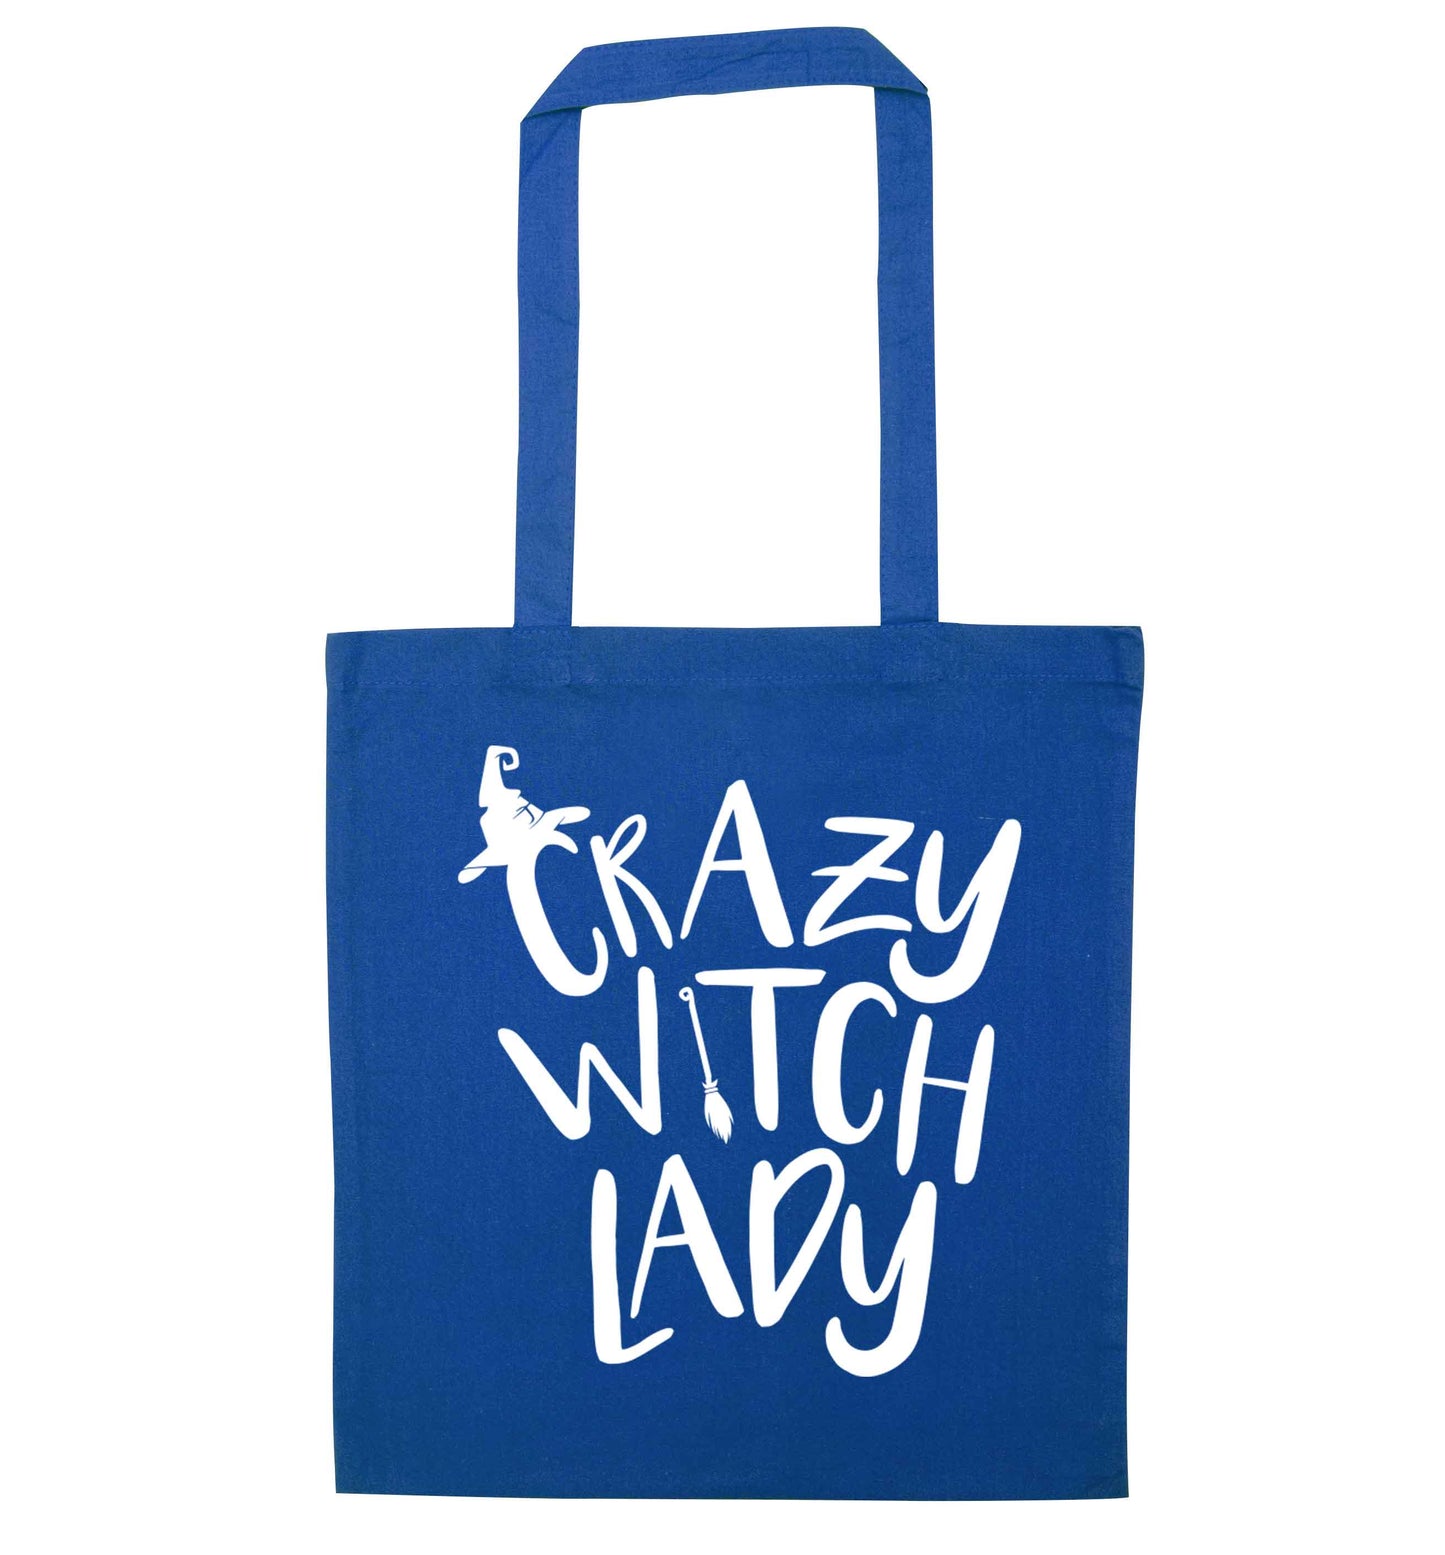 Crazy witch lady blue tote bag